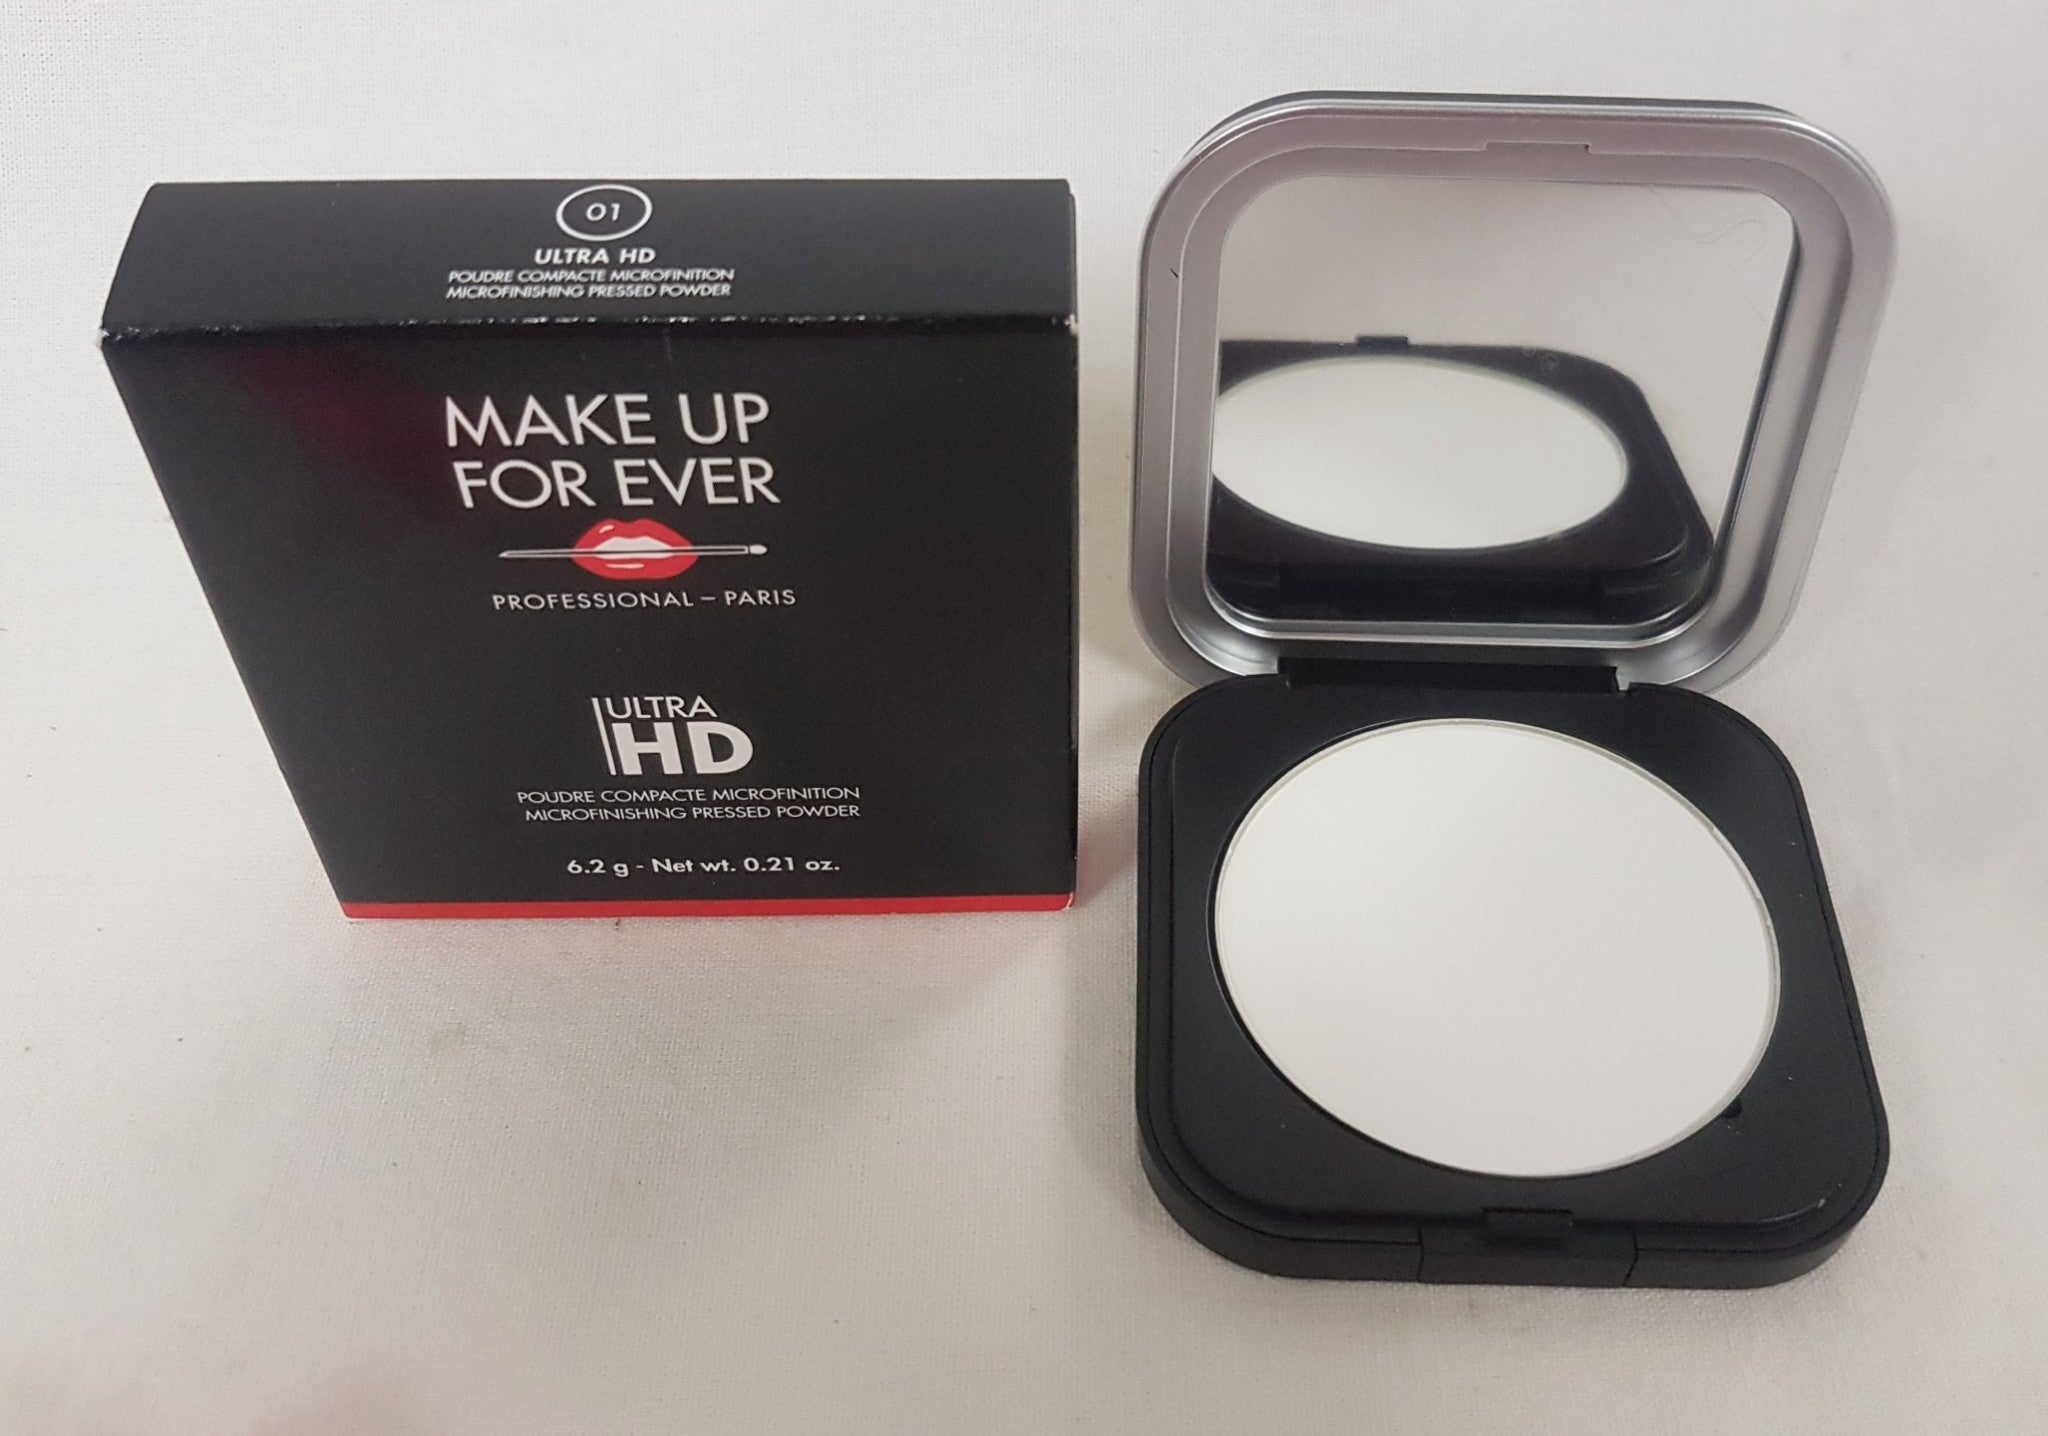 NEW, MAKEUP FOREVER ULTRA HD 01 Microfinising Pressed Powder, 6.2g/0.21oz